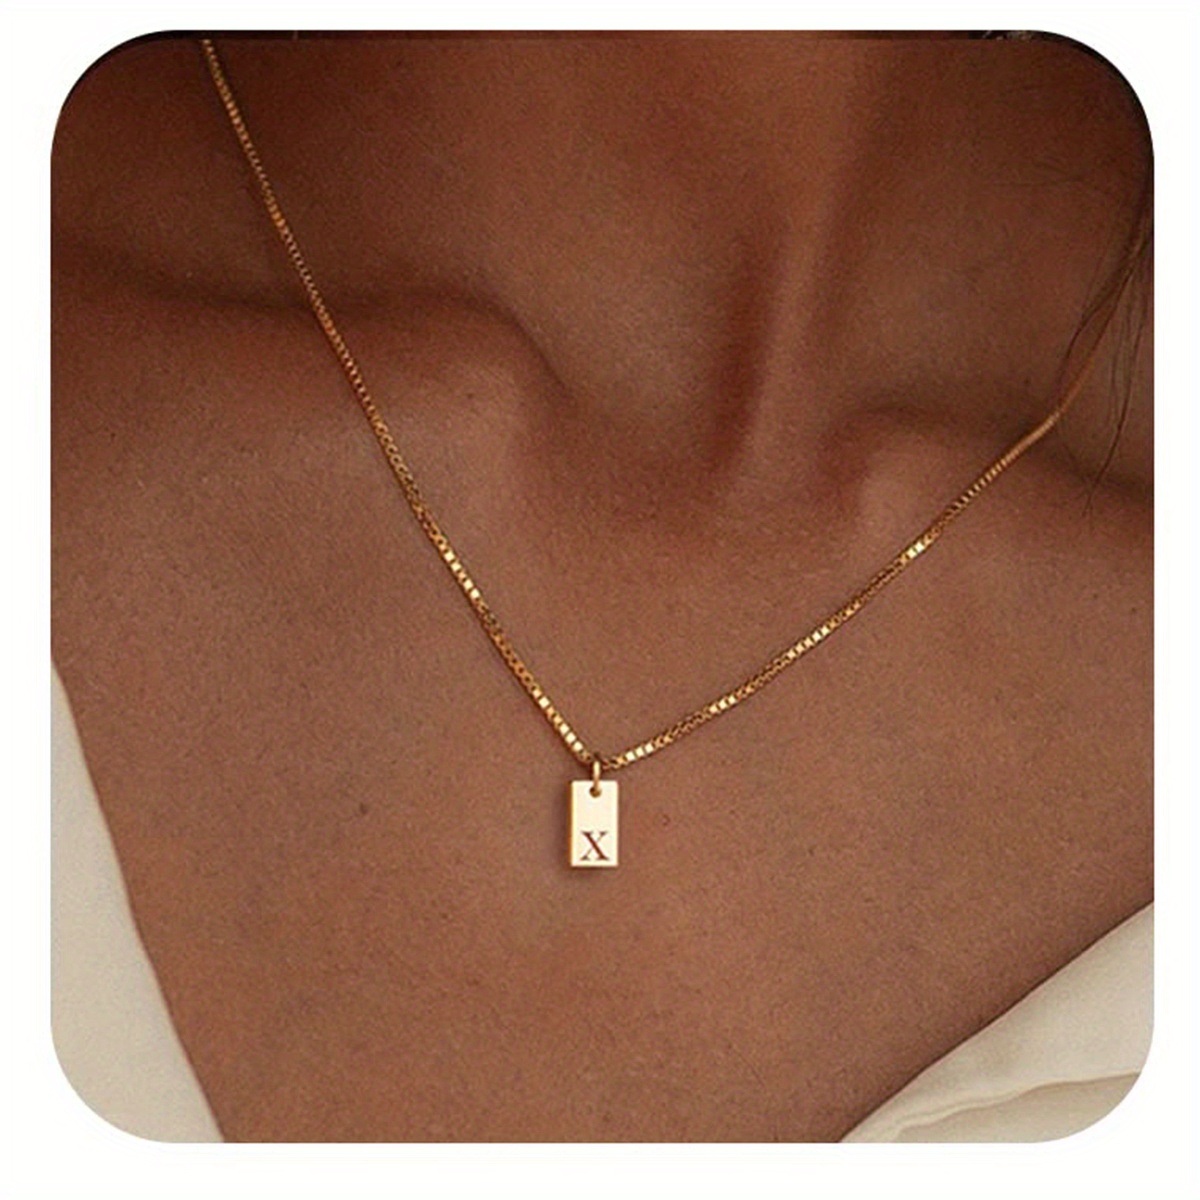 Vertical Nameplate Necklace - Zoe Lev Jewelry